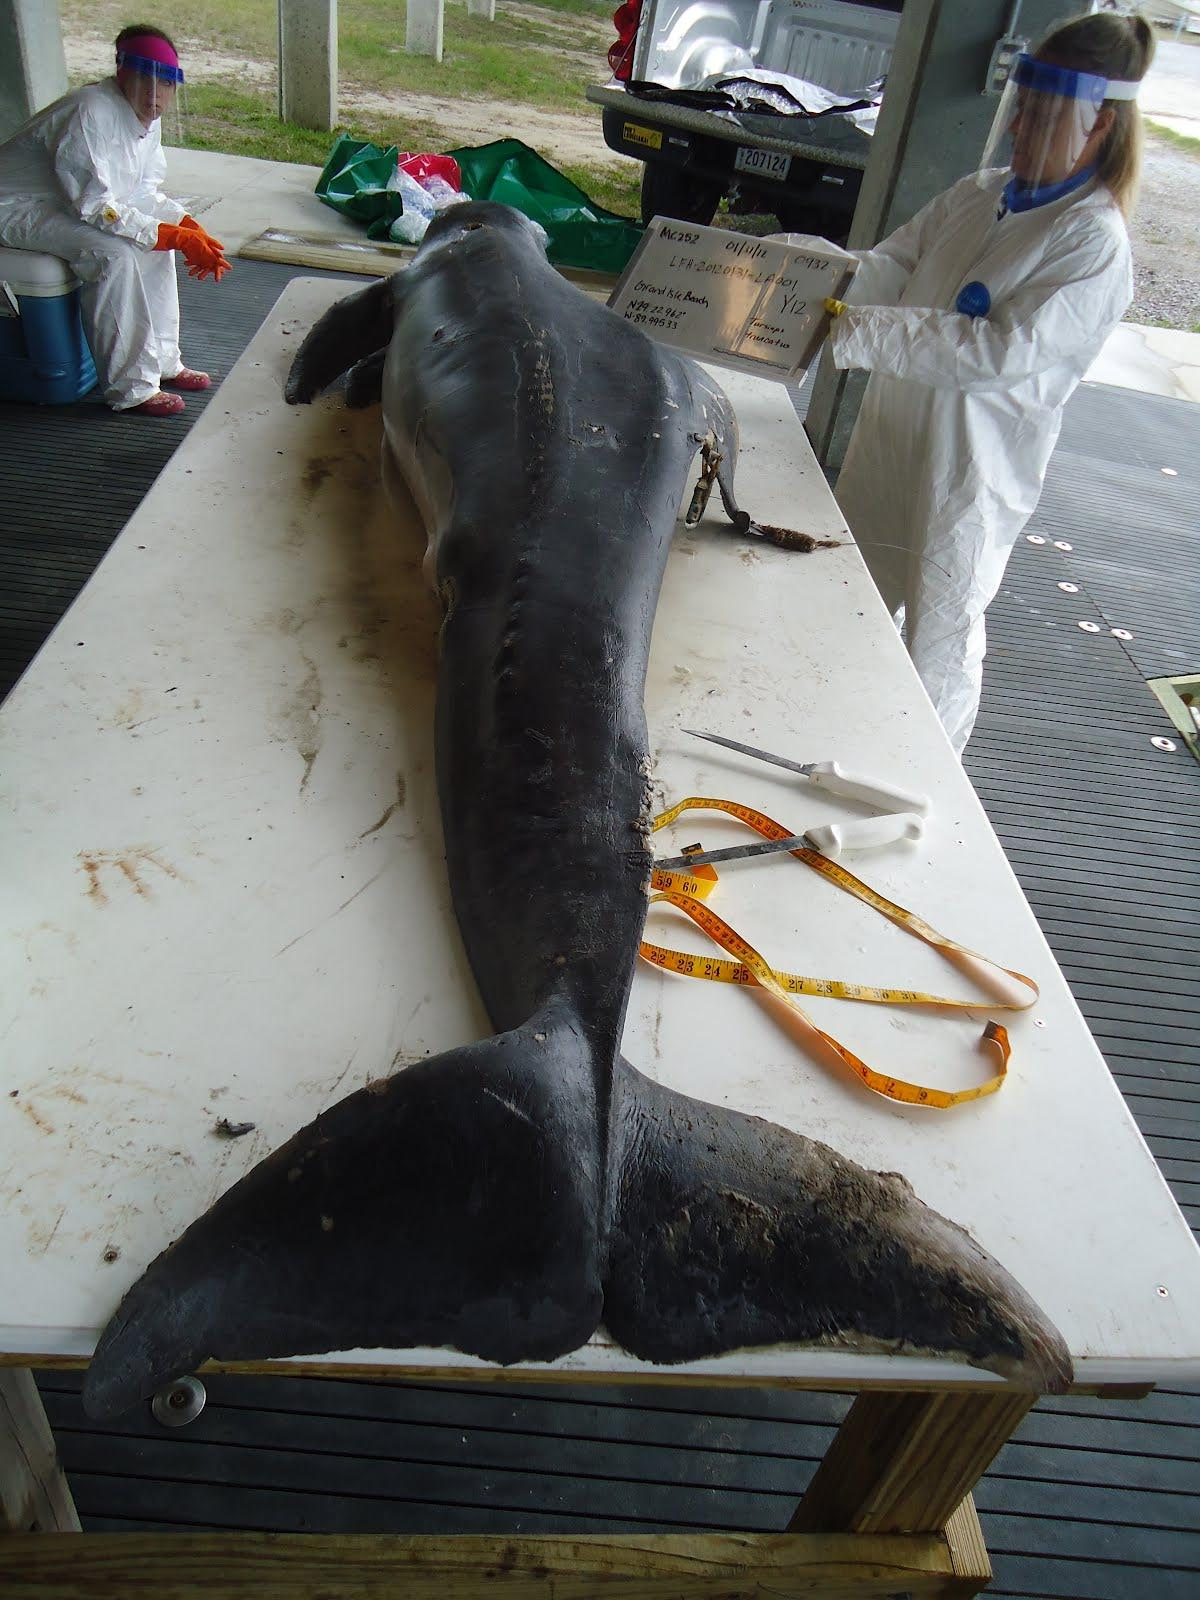 PHOTO: The carcass of Y12, one of the Barataria Bay dolphins closely studied by researchers and determined to be in poor health, was recovered on Grand Isle Beach on January 31, 2012.